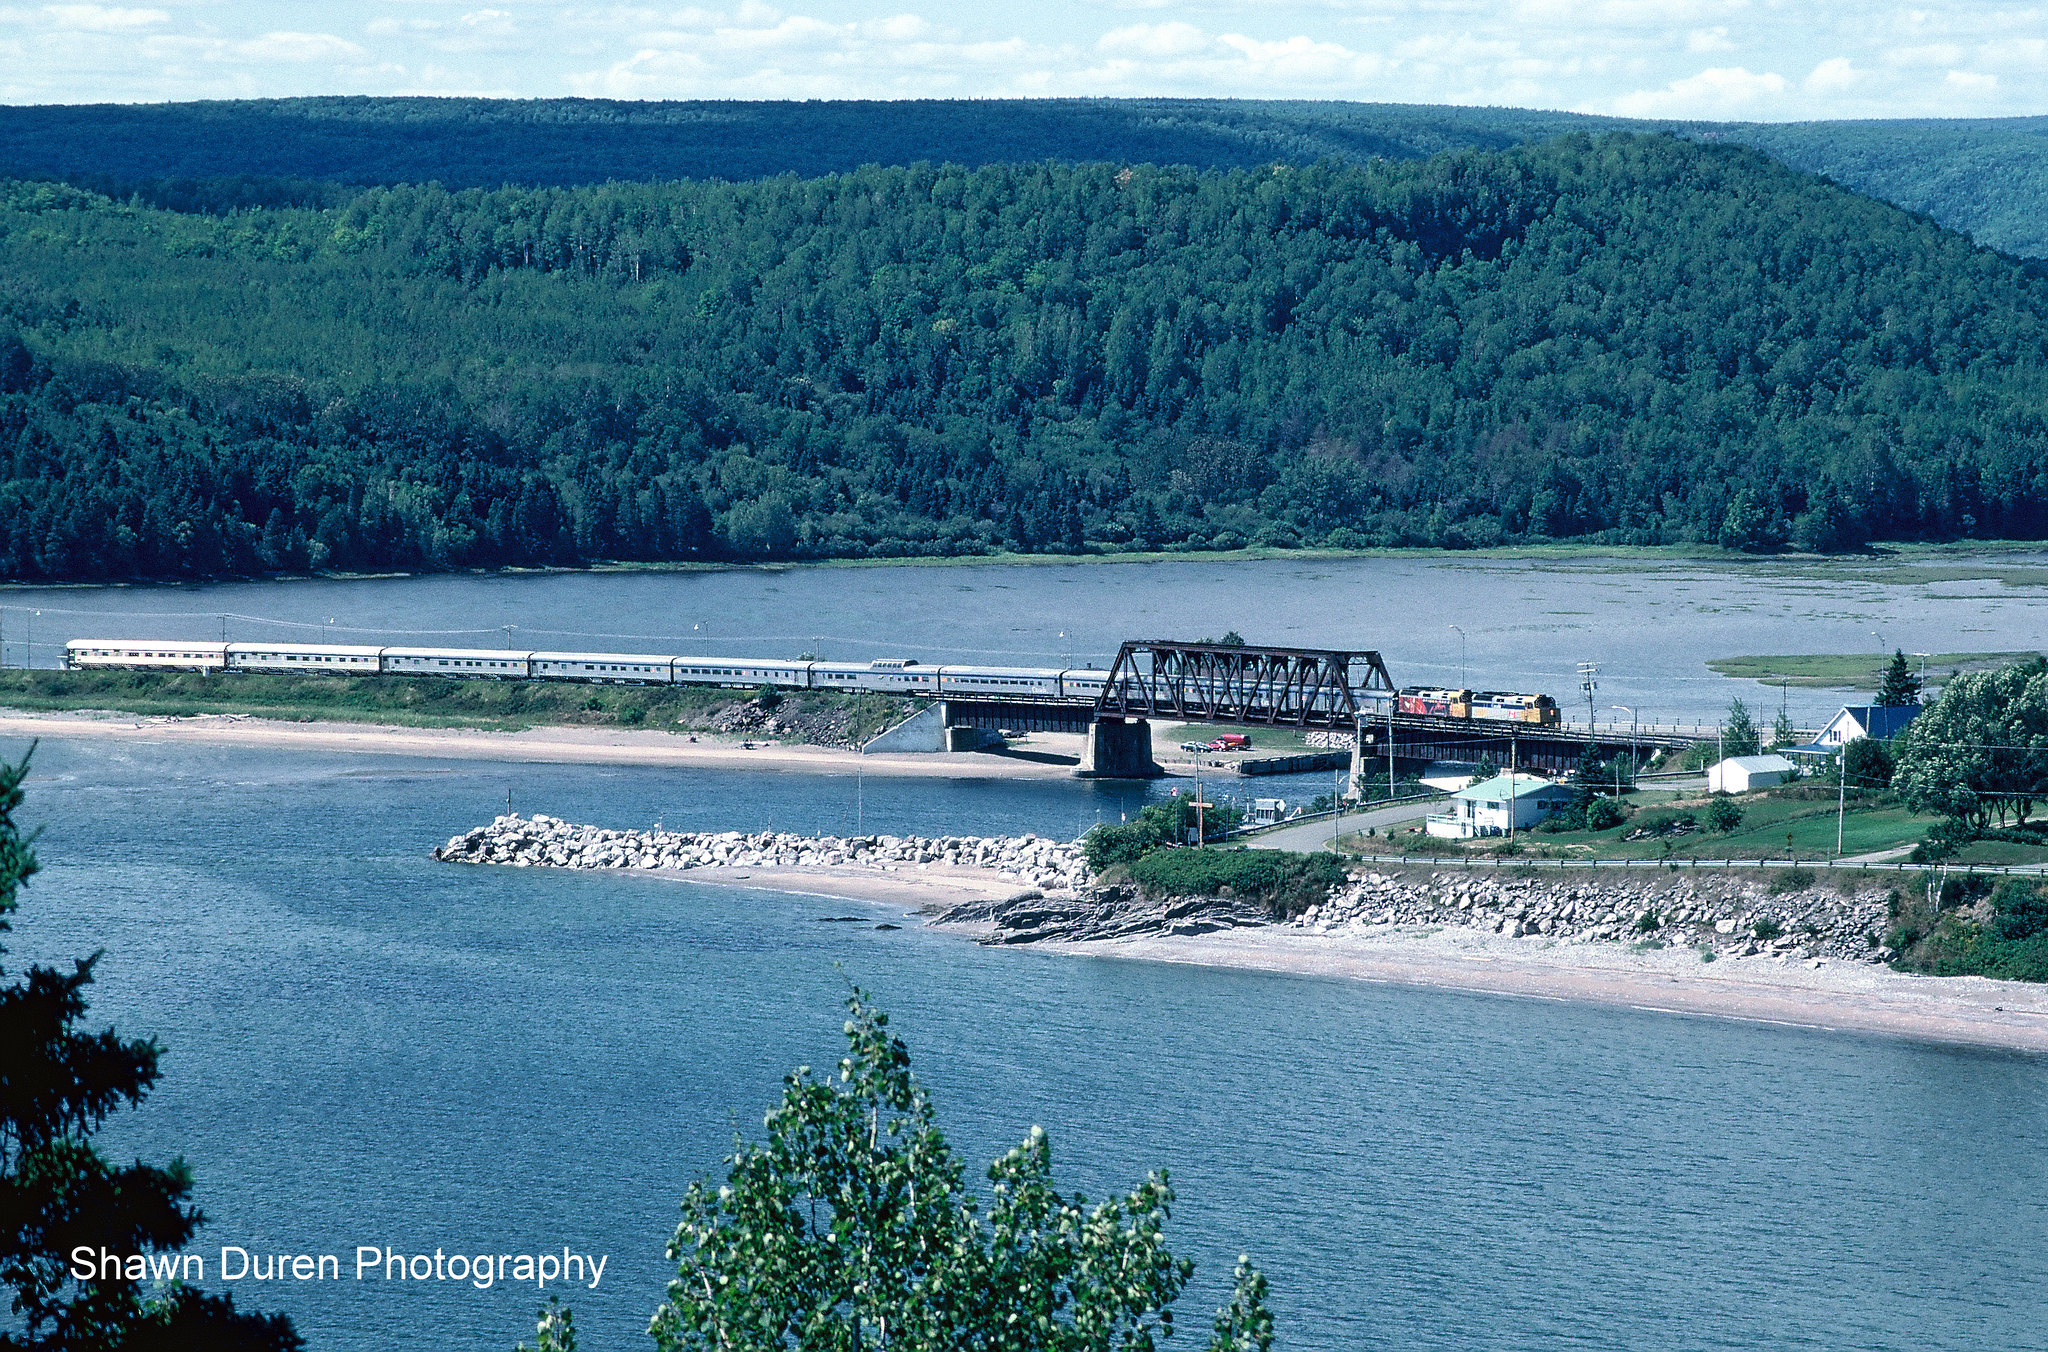 On top of Le tunnel du Cap-à-l'Enfer, is a scenic lookout over Port Daniel, Quebec. Here, VIA Rail Train #16, the Chaleur crosses a bridge before coming through the tunnel underneath. August 15, 2005. 